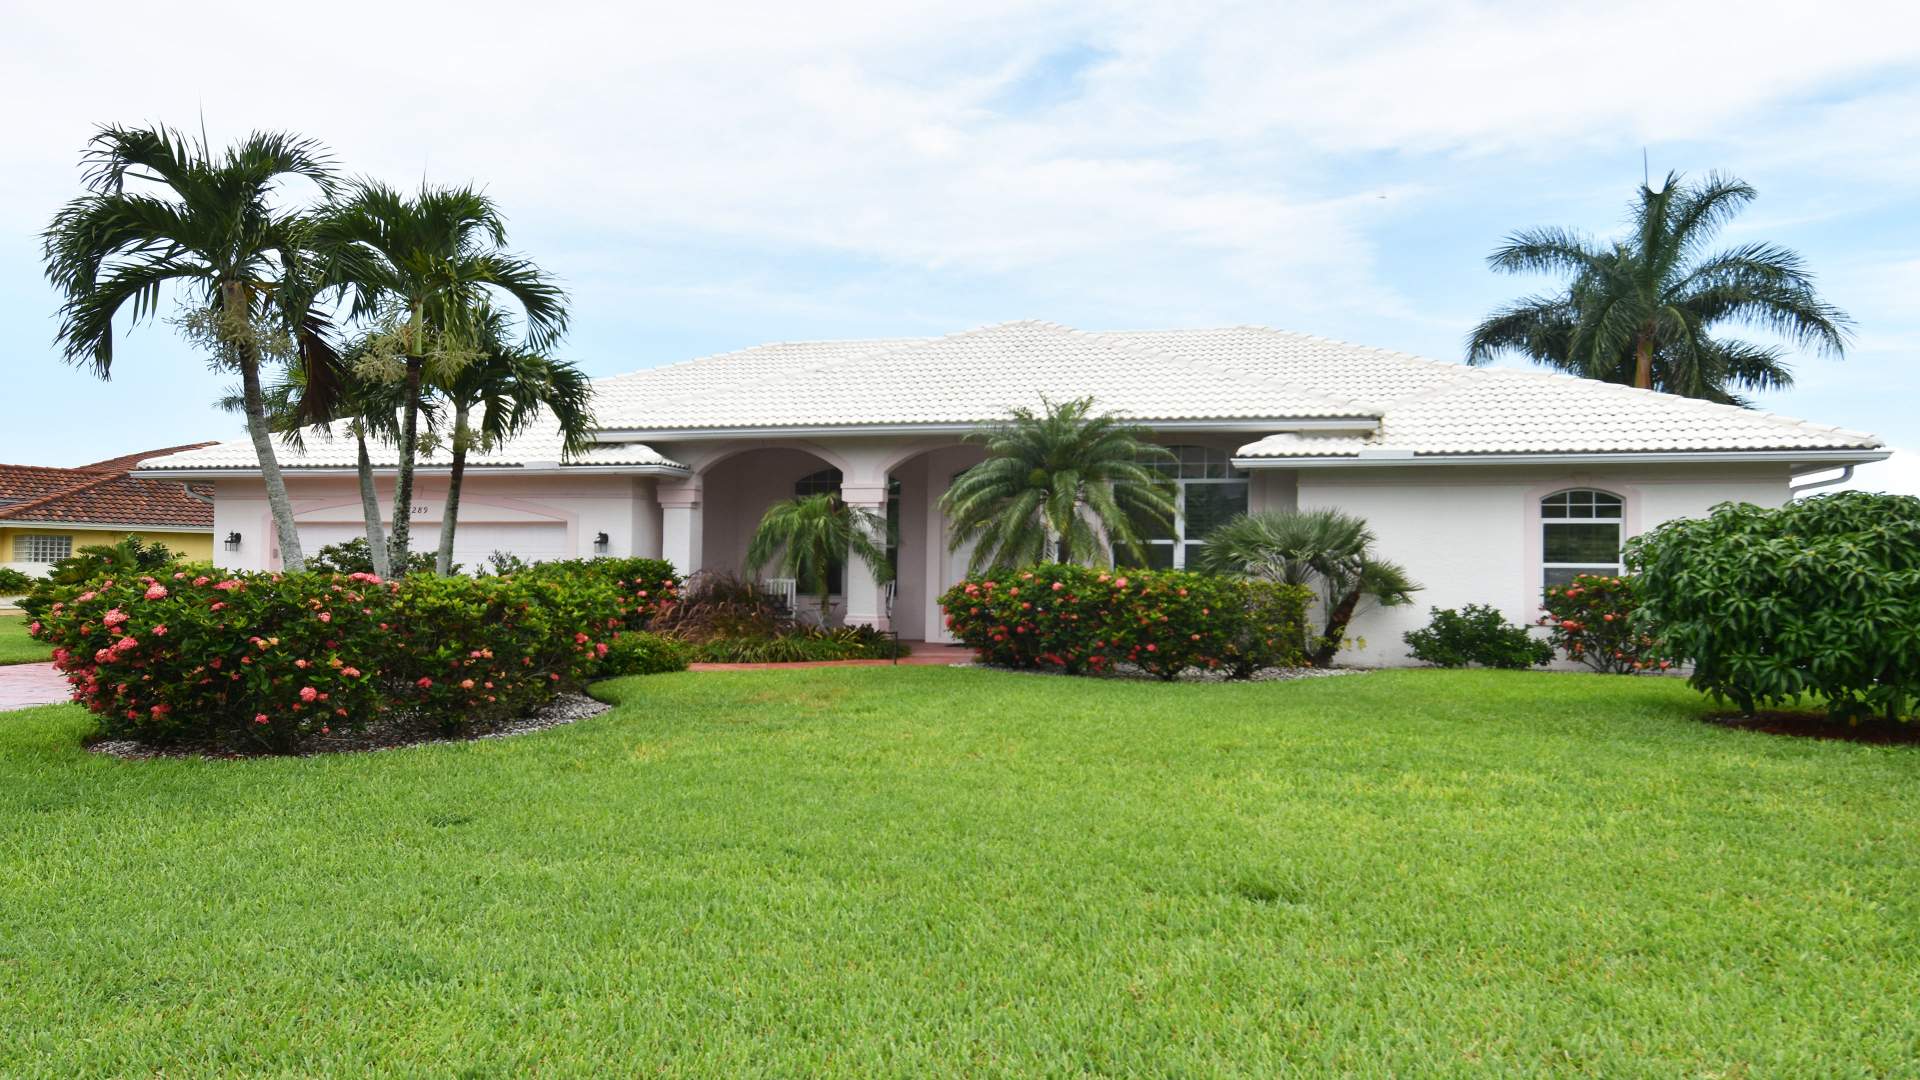 A stylish lakefront property in the Kings Lake community in Naples